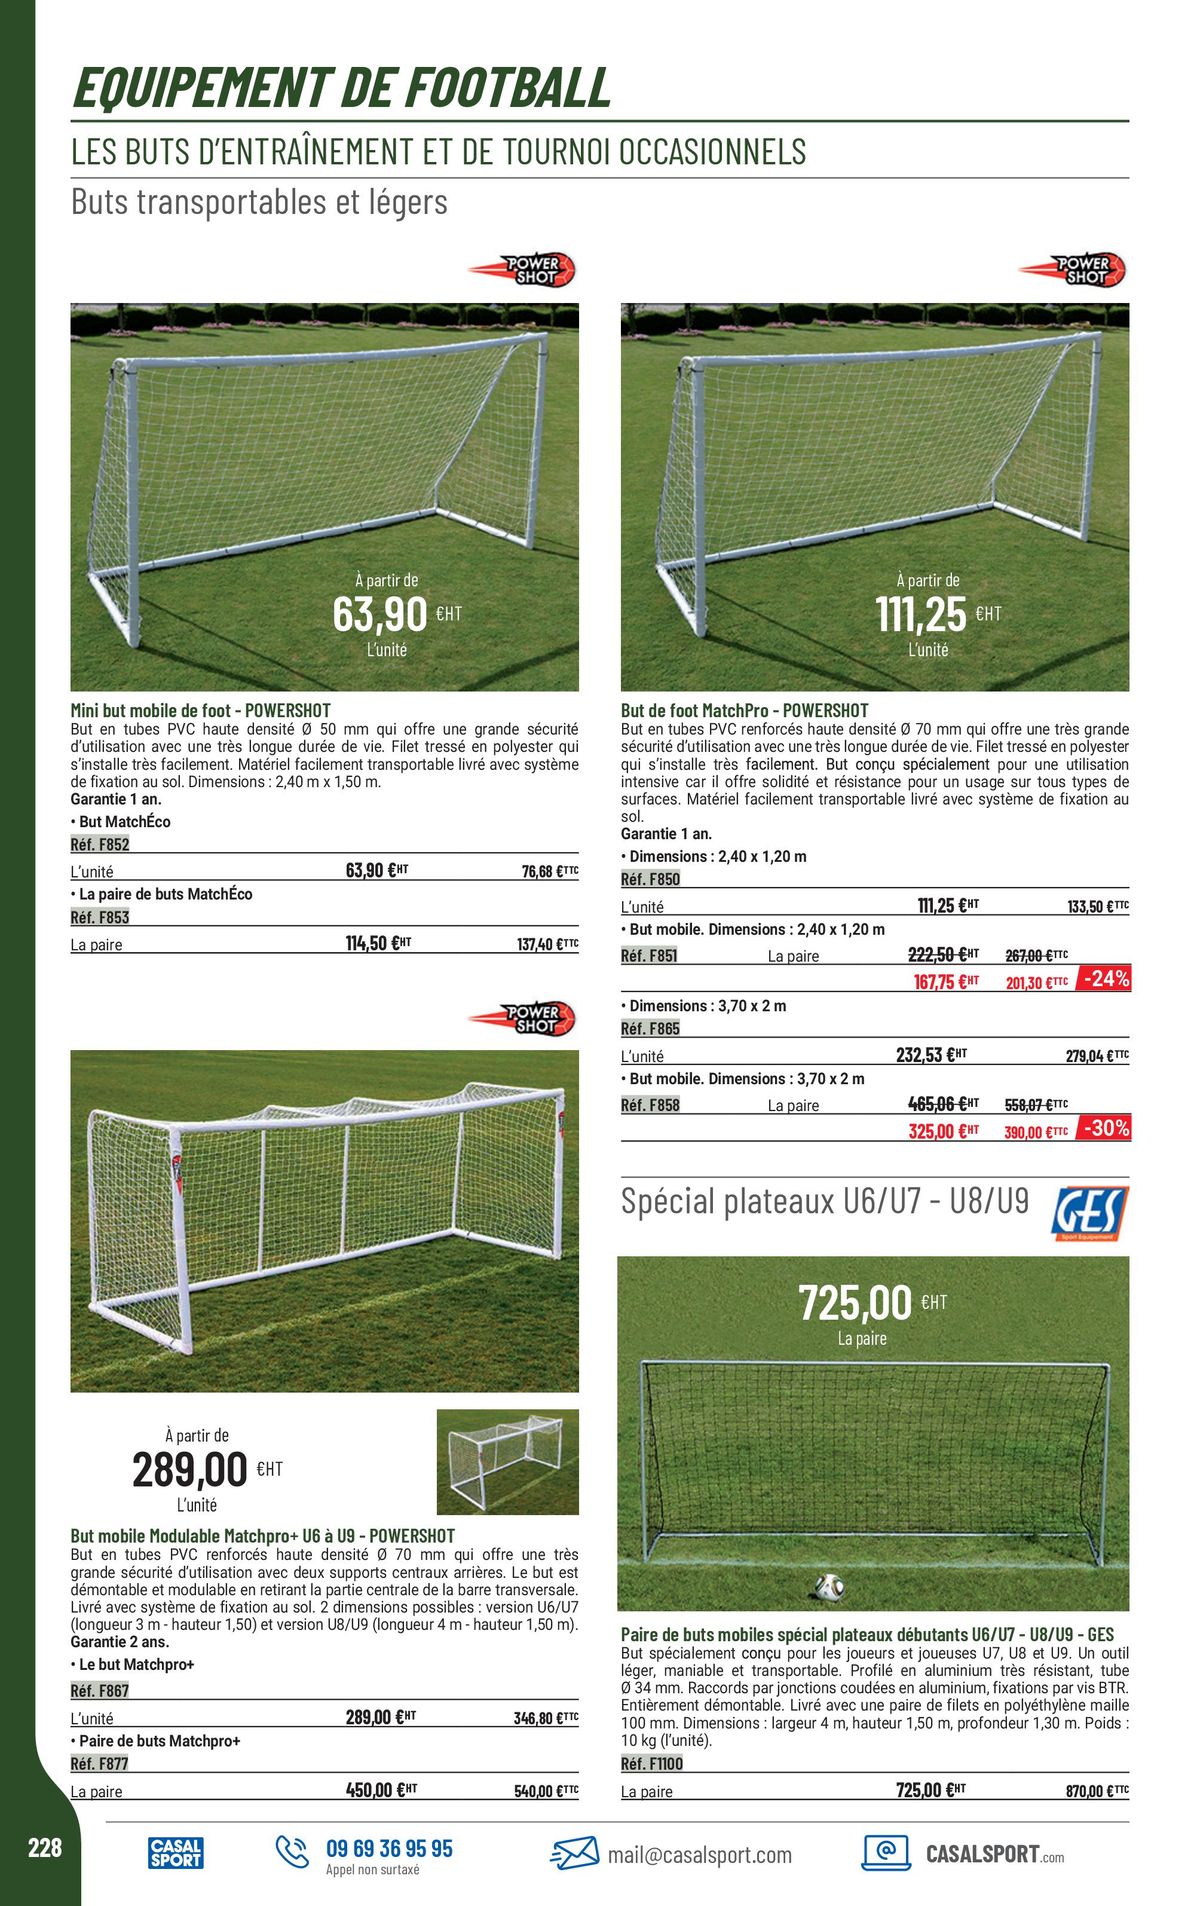 Catalogue Equipement sportif, page 00200